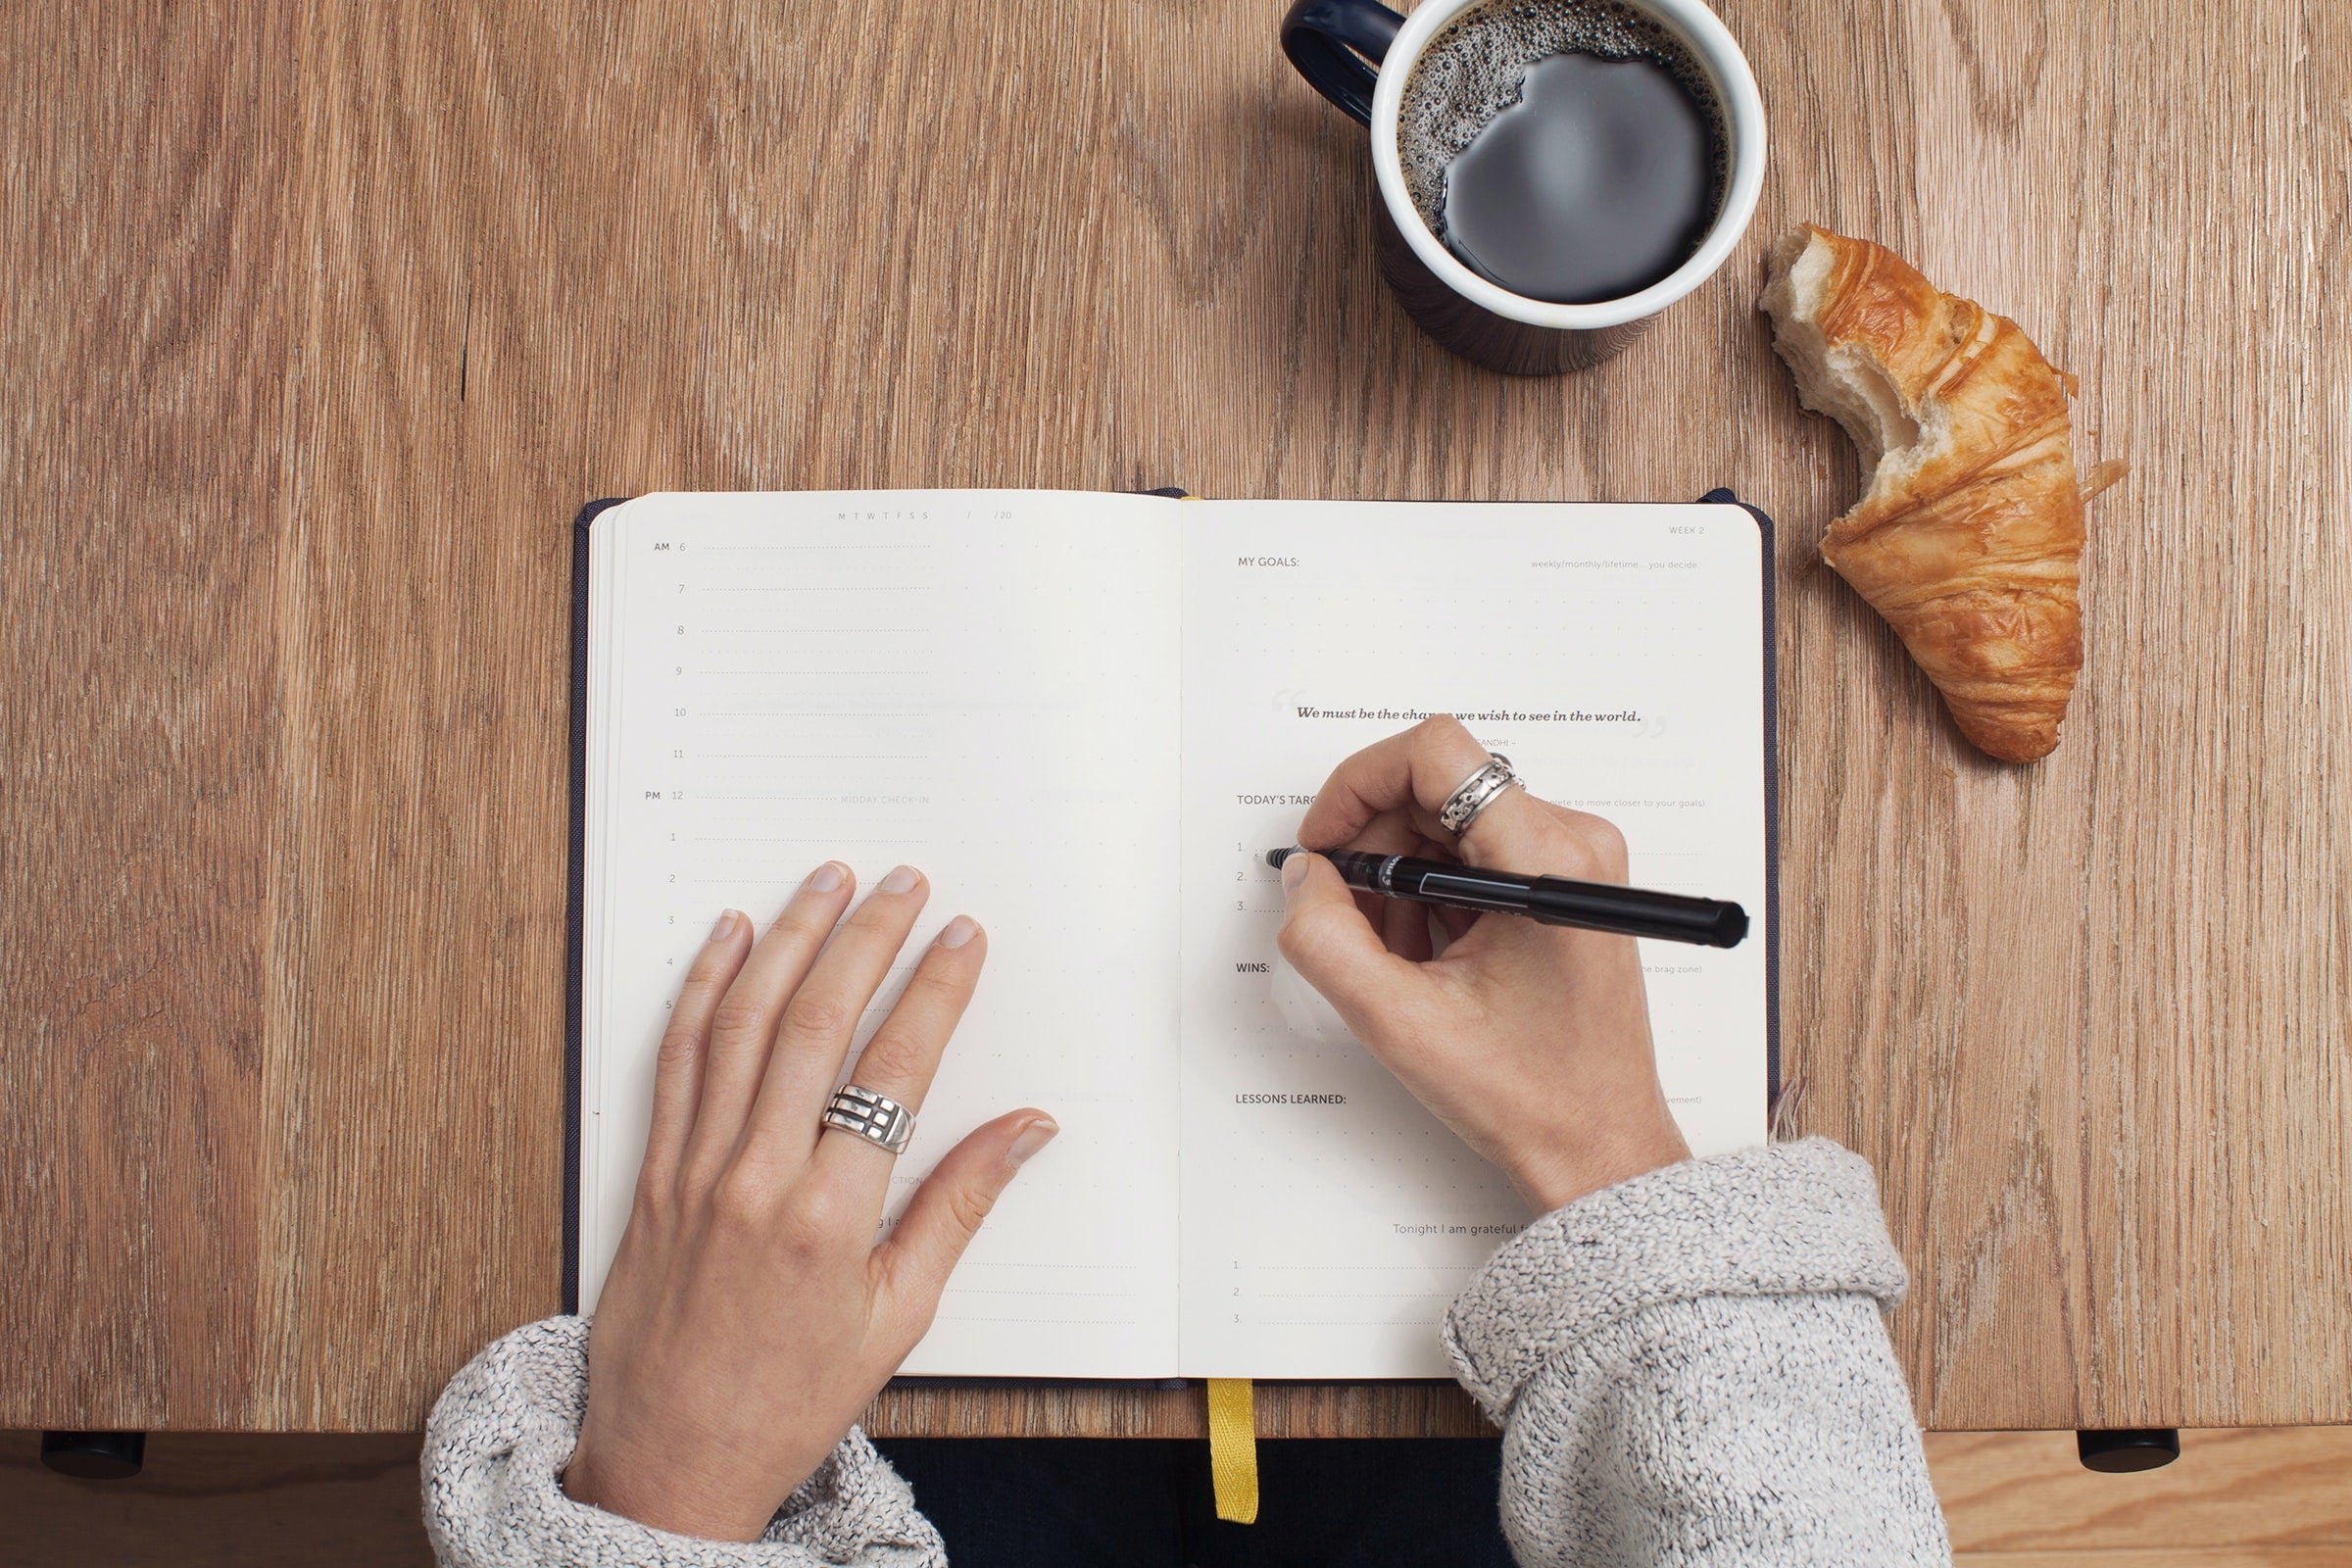 A woman in a grey sweater sits at a desk writing in a book with a black pen. A coffee and croissant is on the desk.